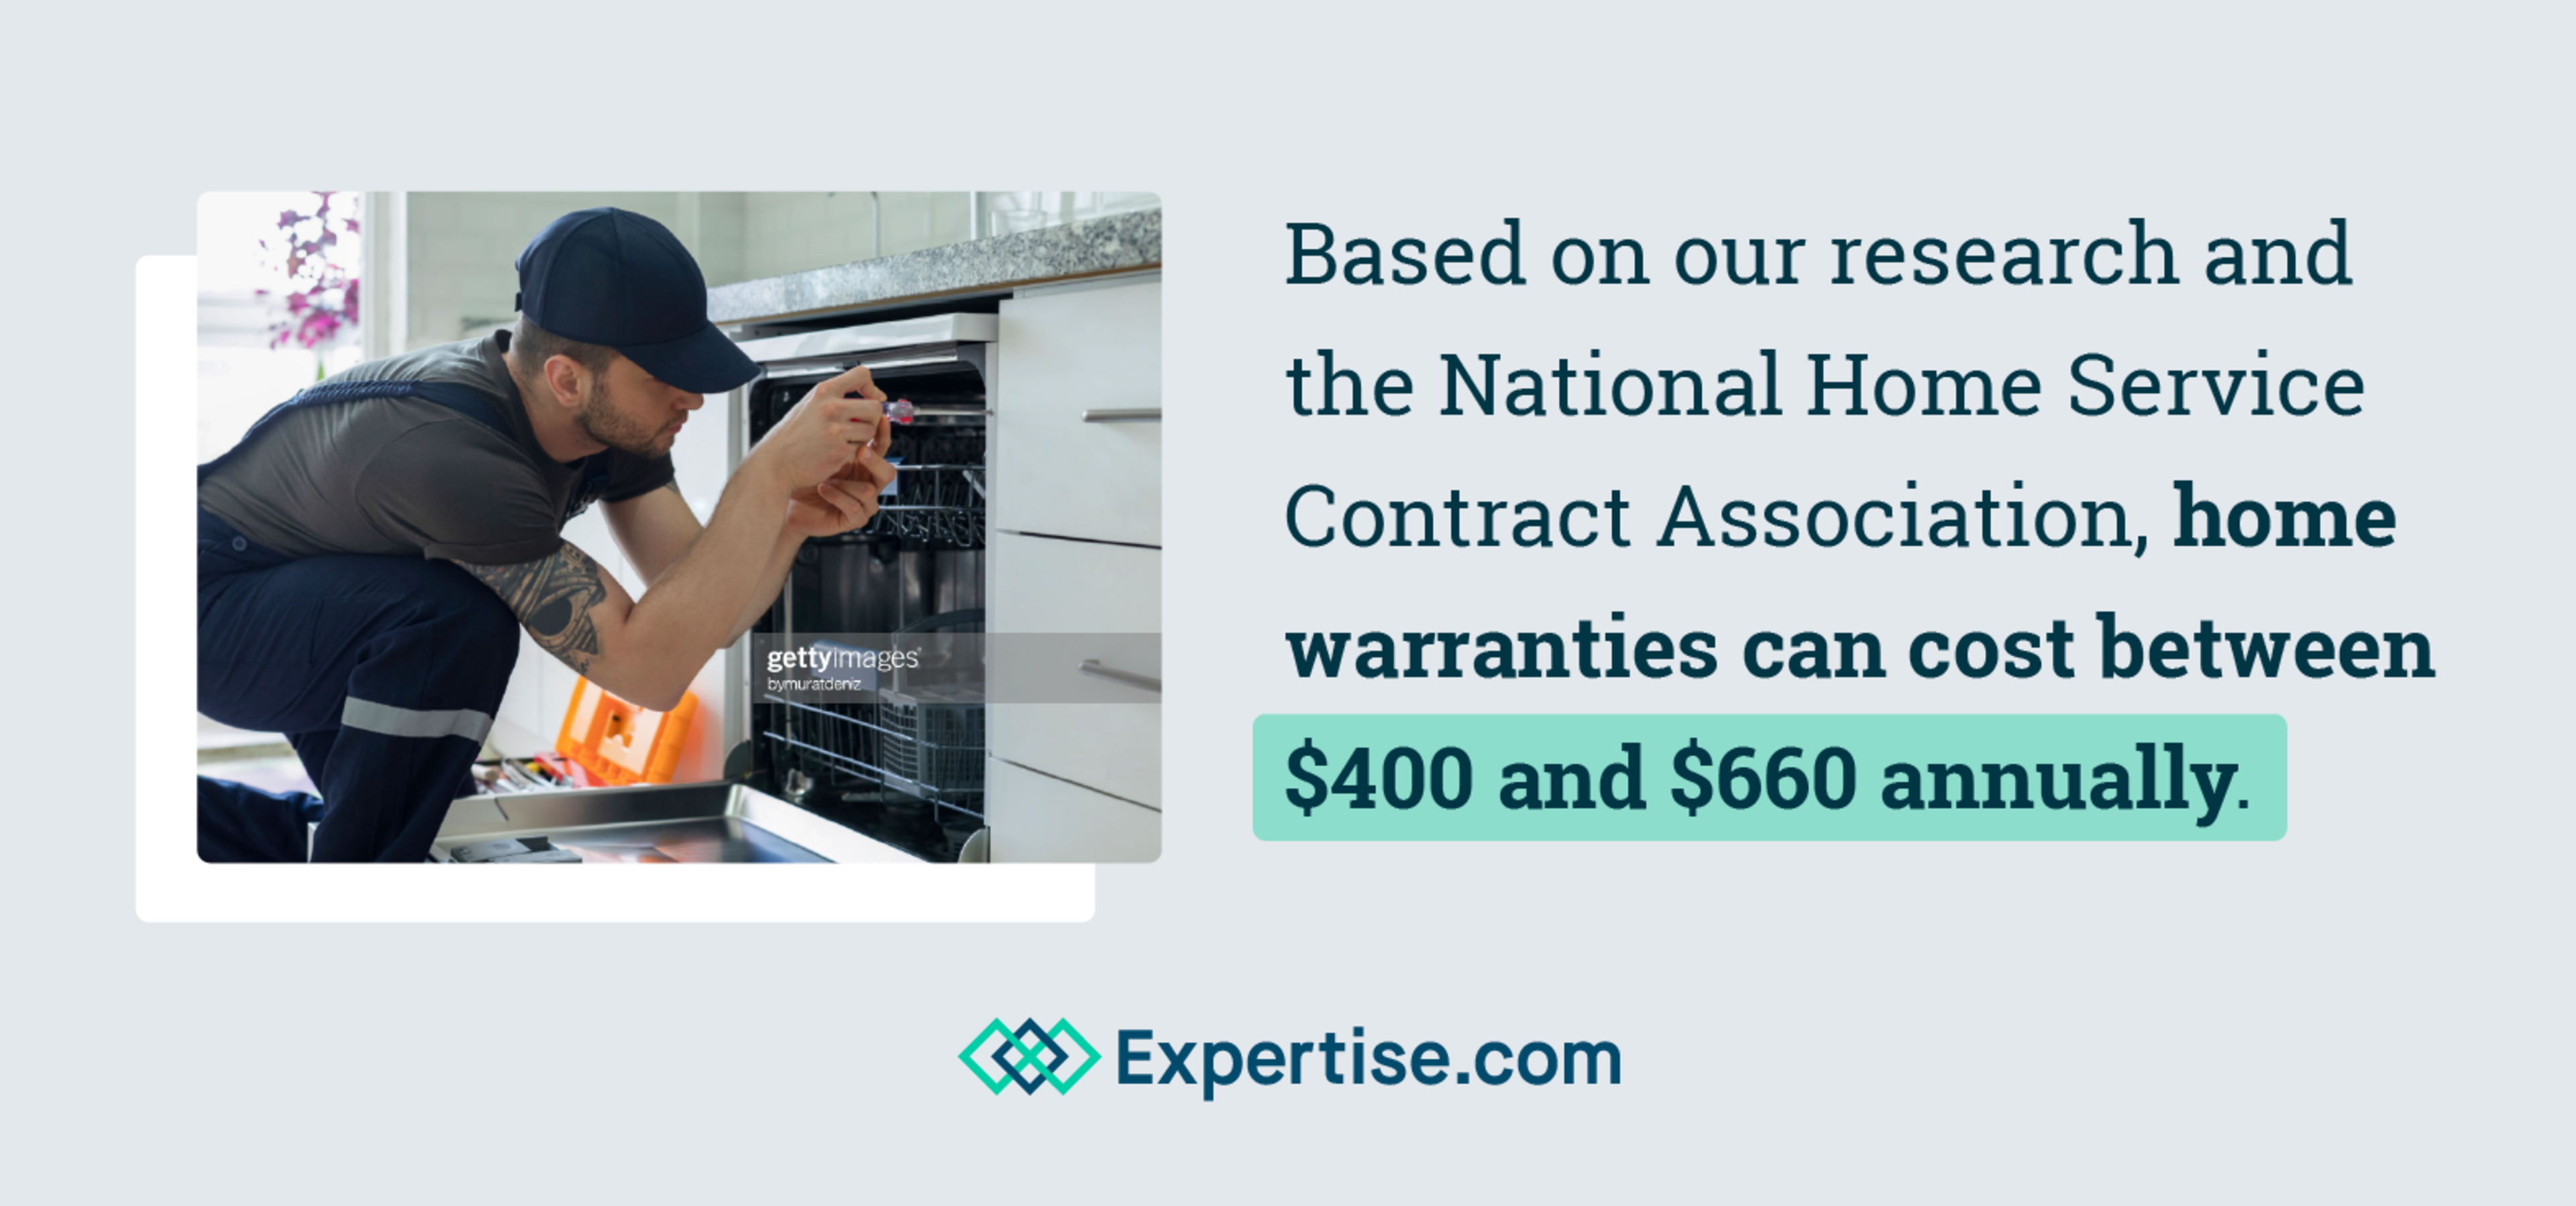 Average cost for a home warranty